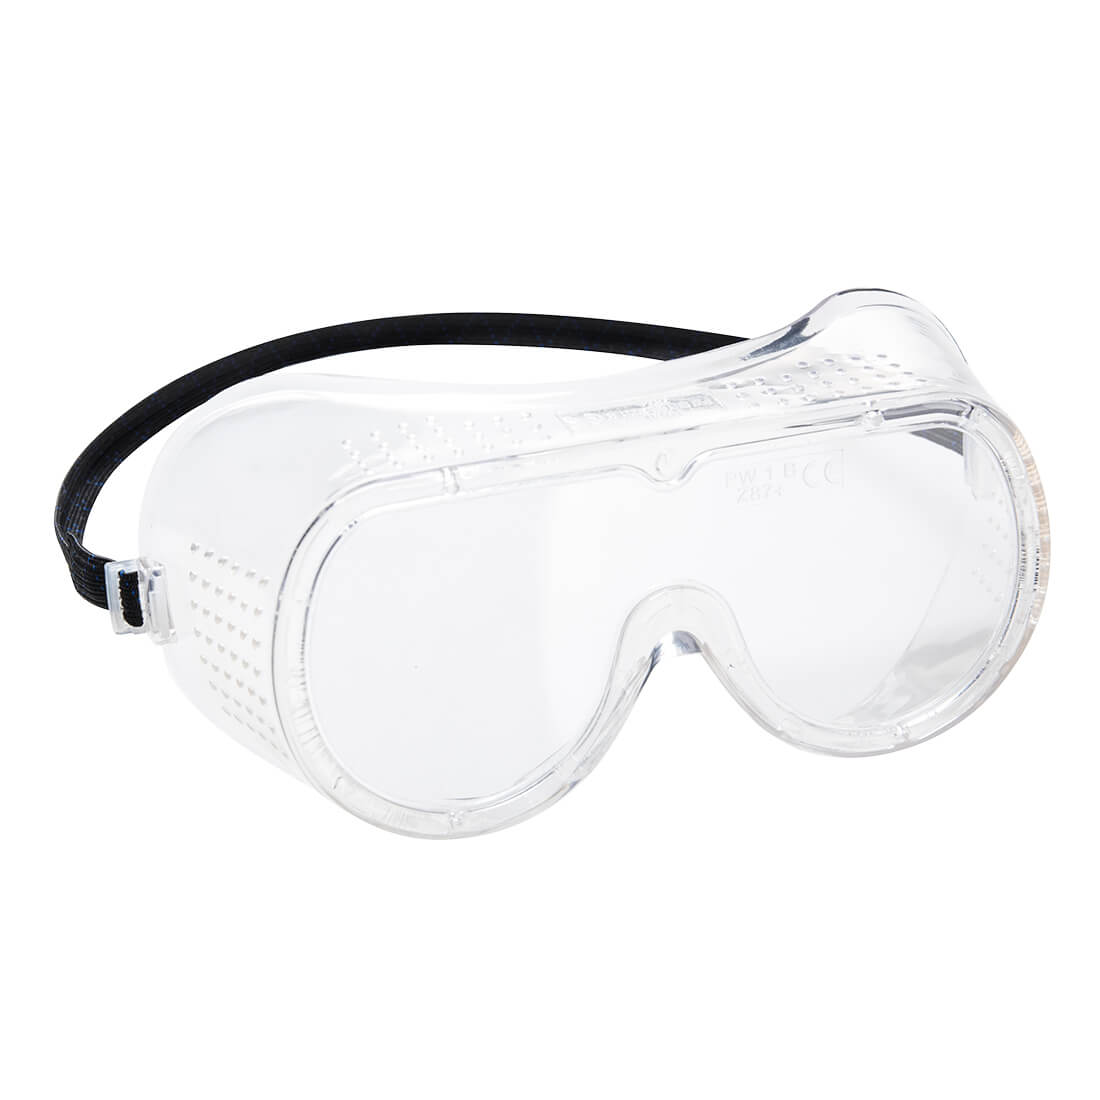 Portwest PW20 - Clear Sz  Direct Vent Safety Goggle Glasses Eye Protection